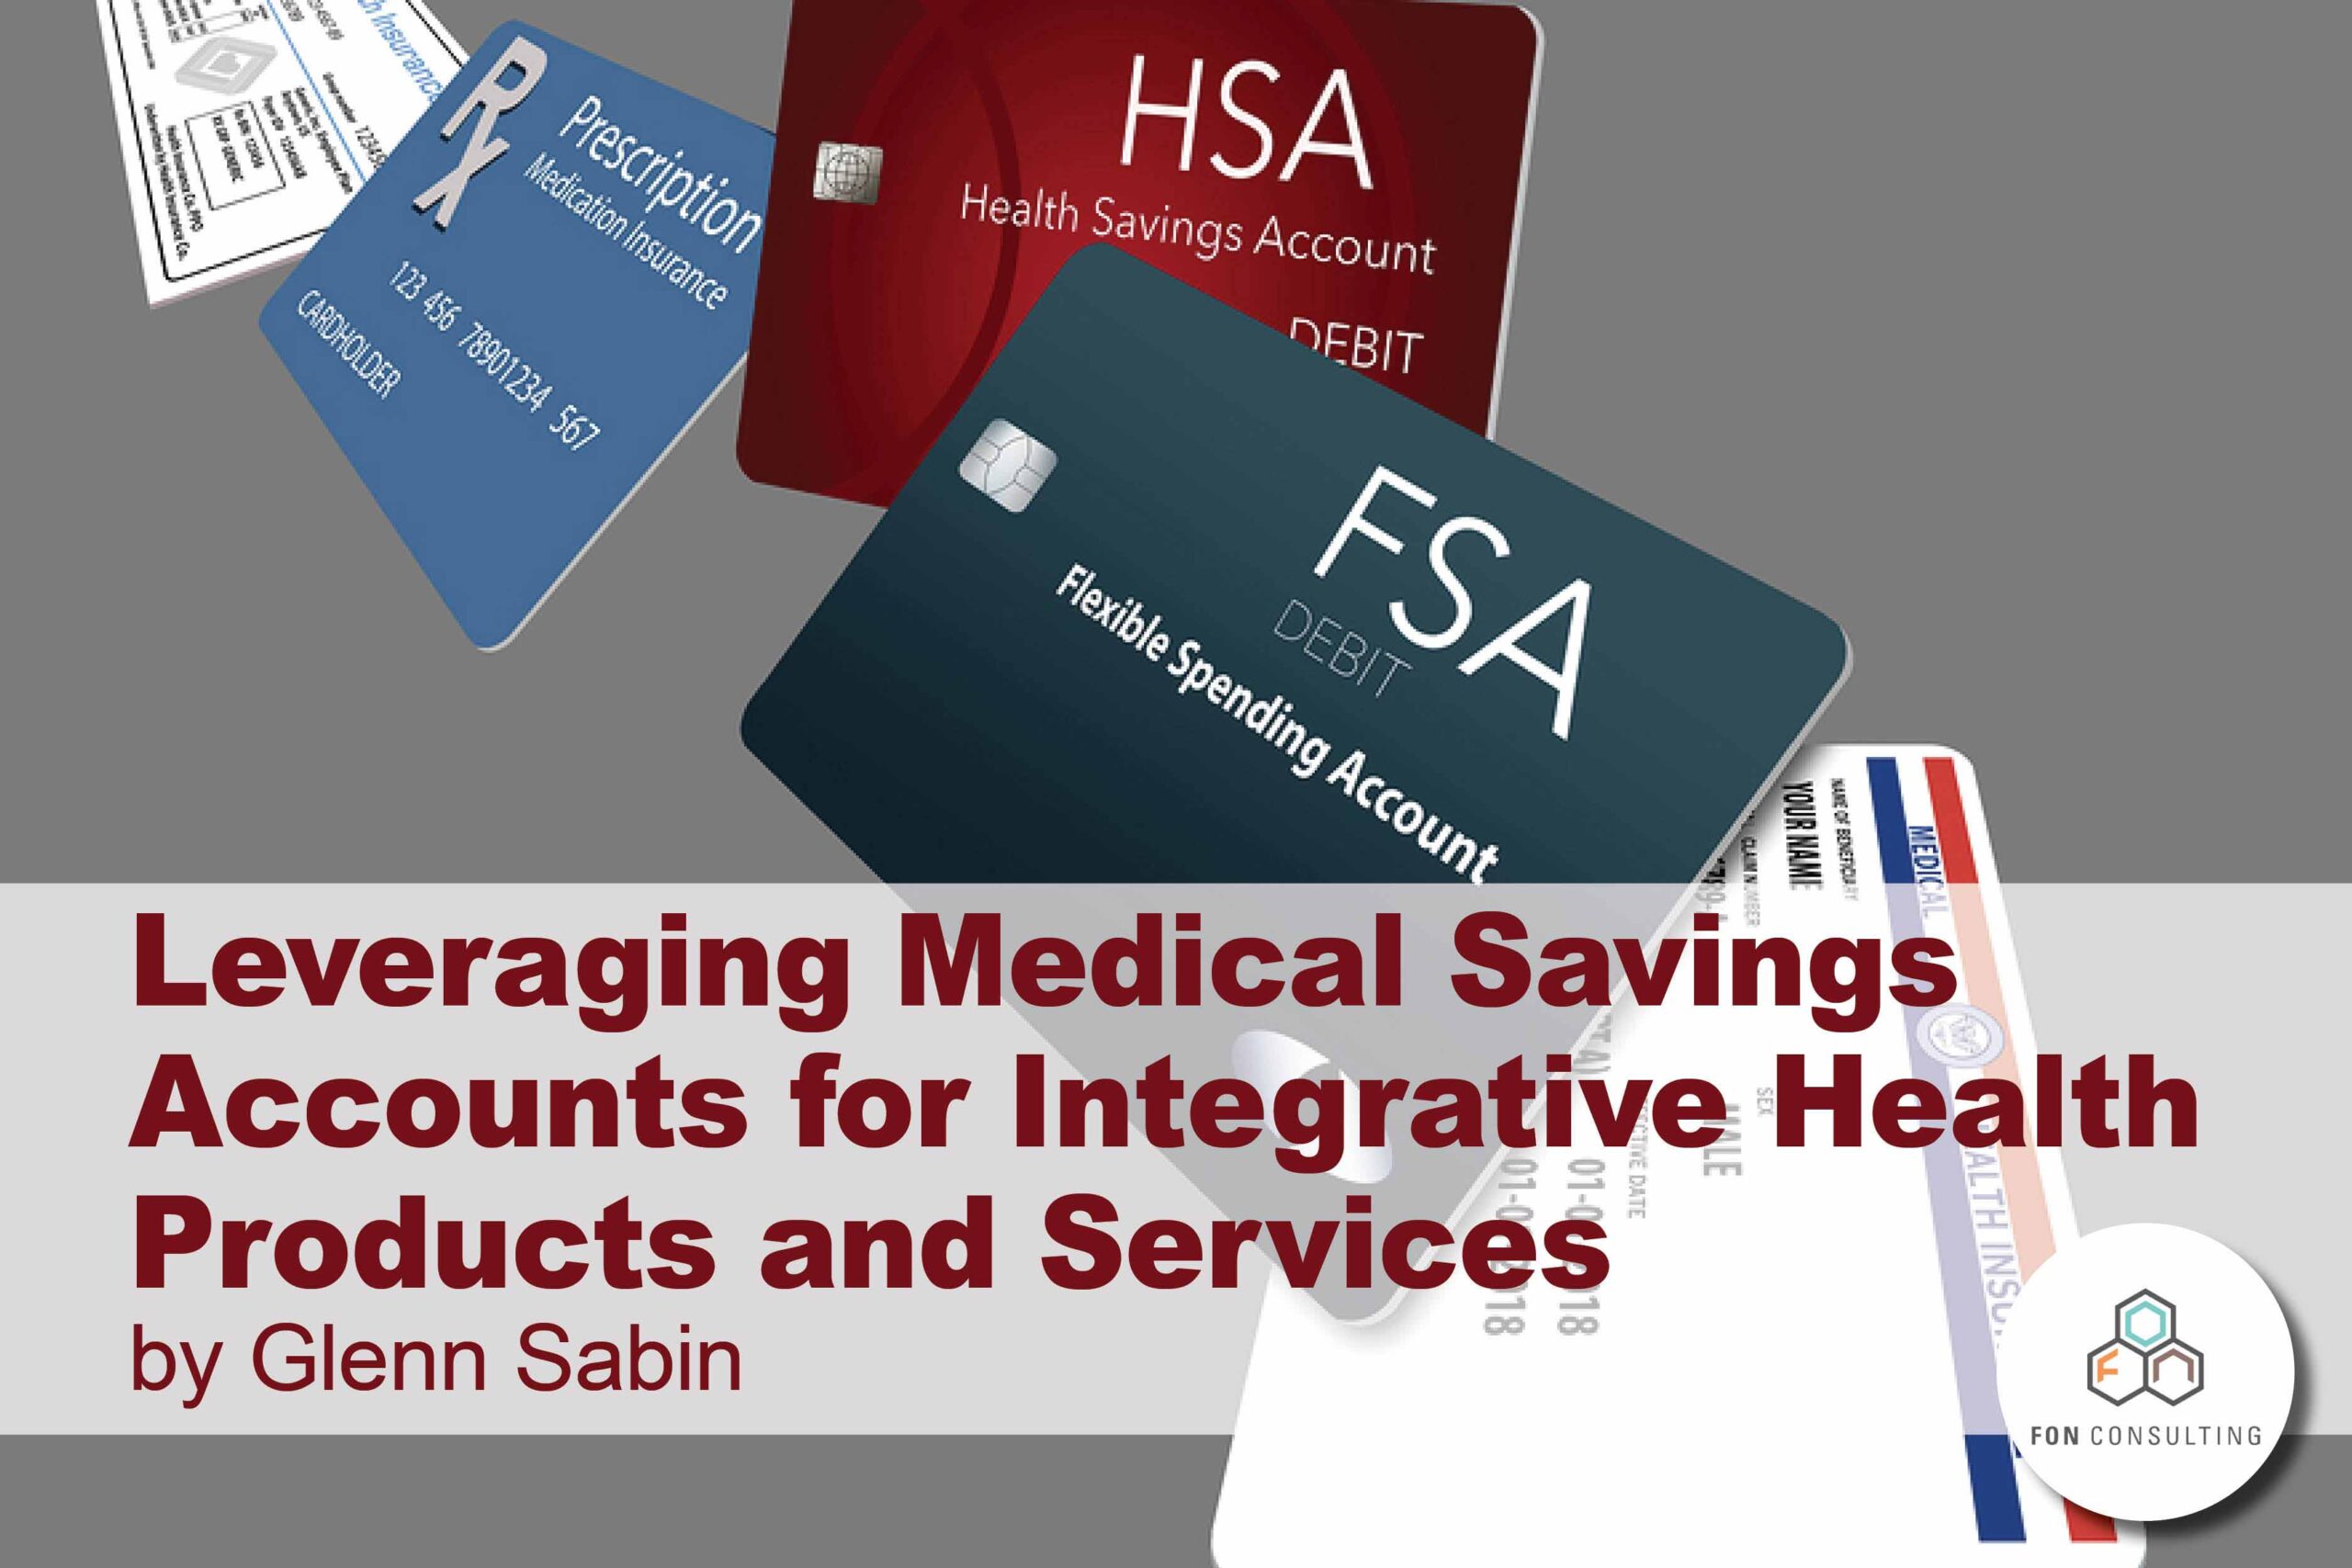 https://fonconsulting.com/wp-content/uploads/2019/03/Leveraging-Medical-Savings-Accounts-for-Integrative-Health-Products-and-Services-w-text-1-scaled.jpg